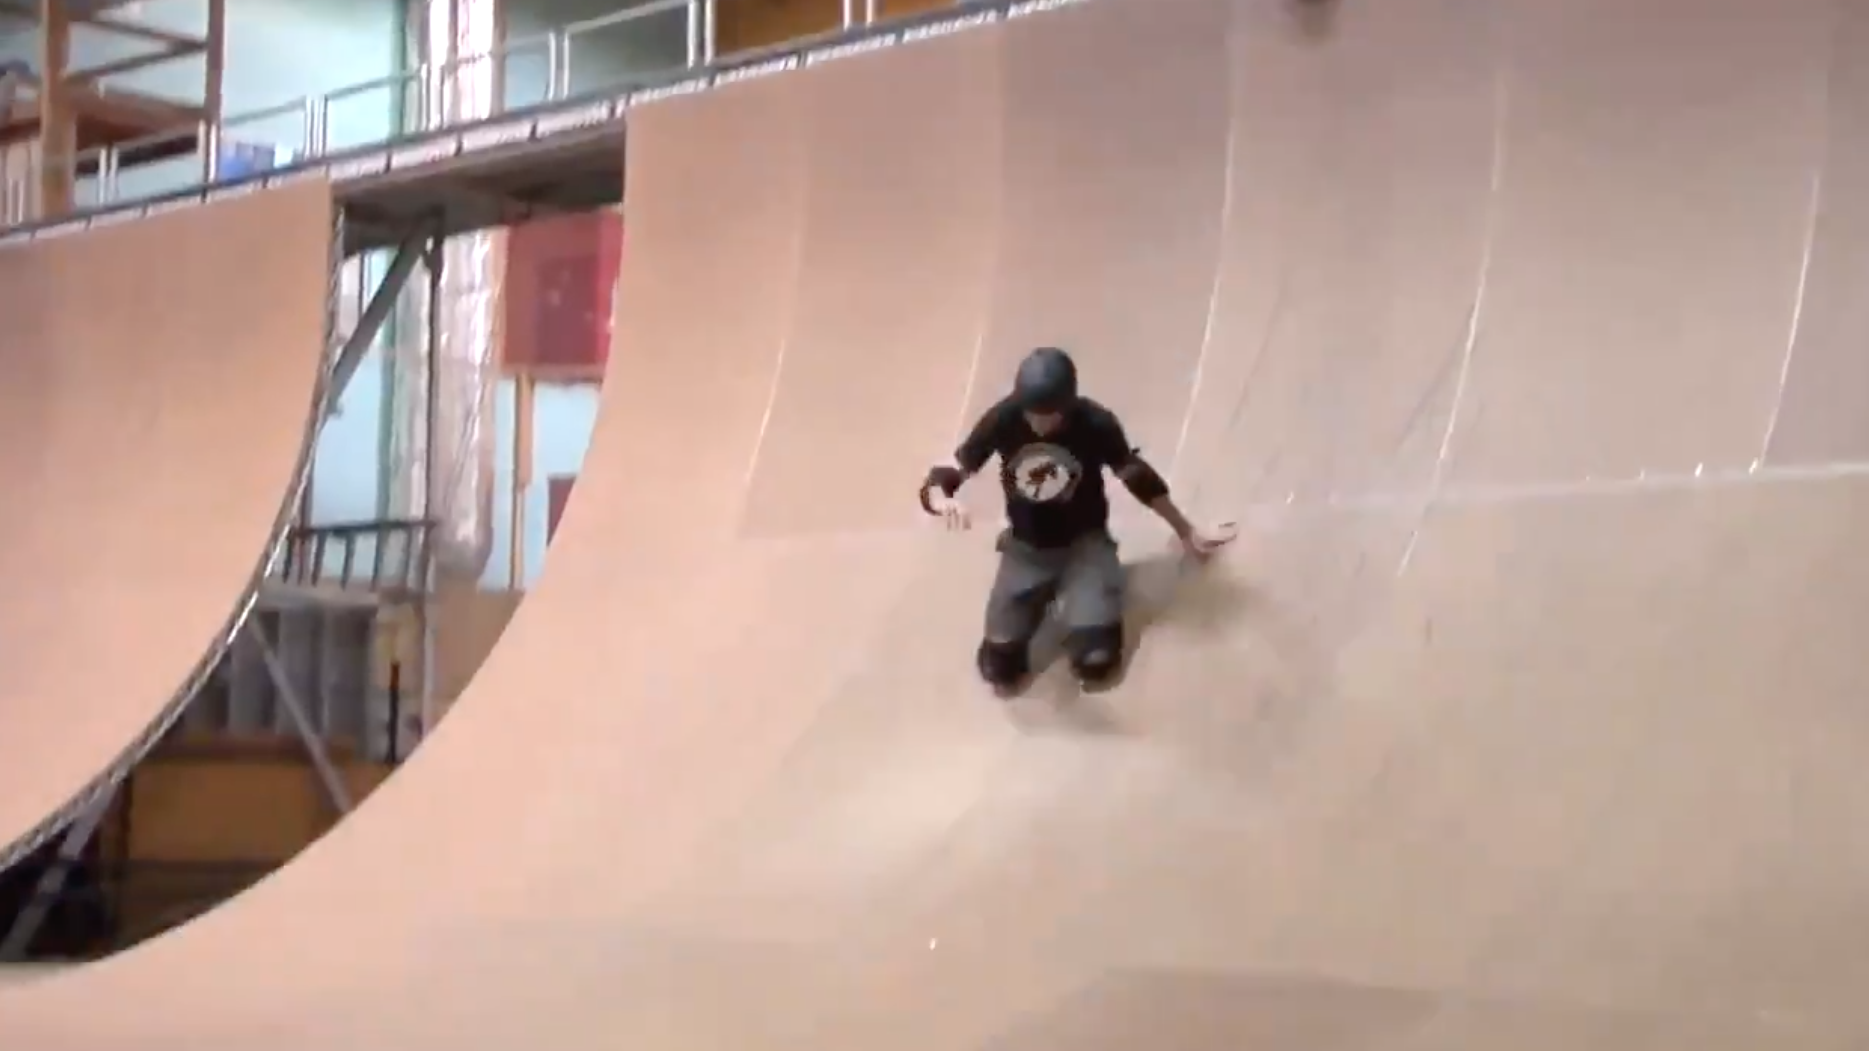 tony hawk slides on his knee pads down the side of a half pipe